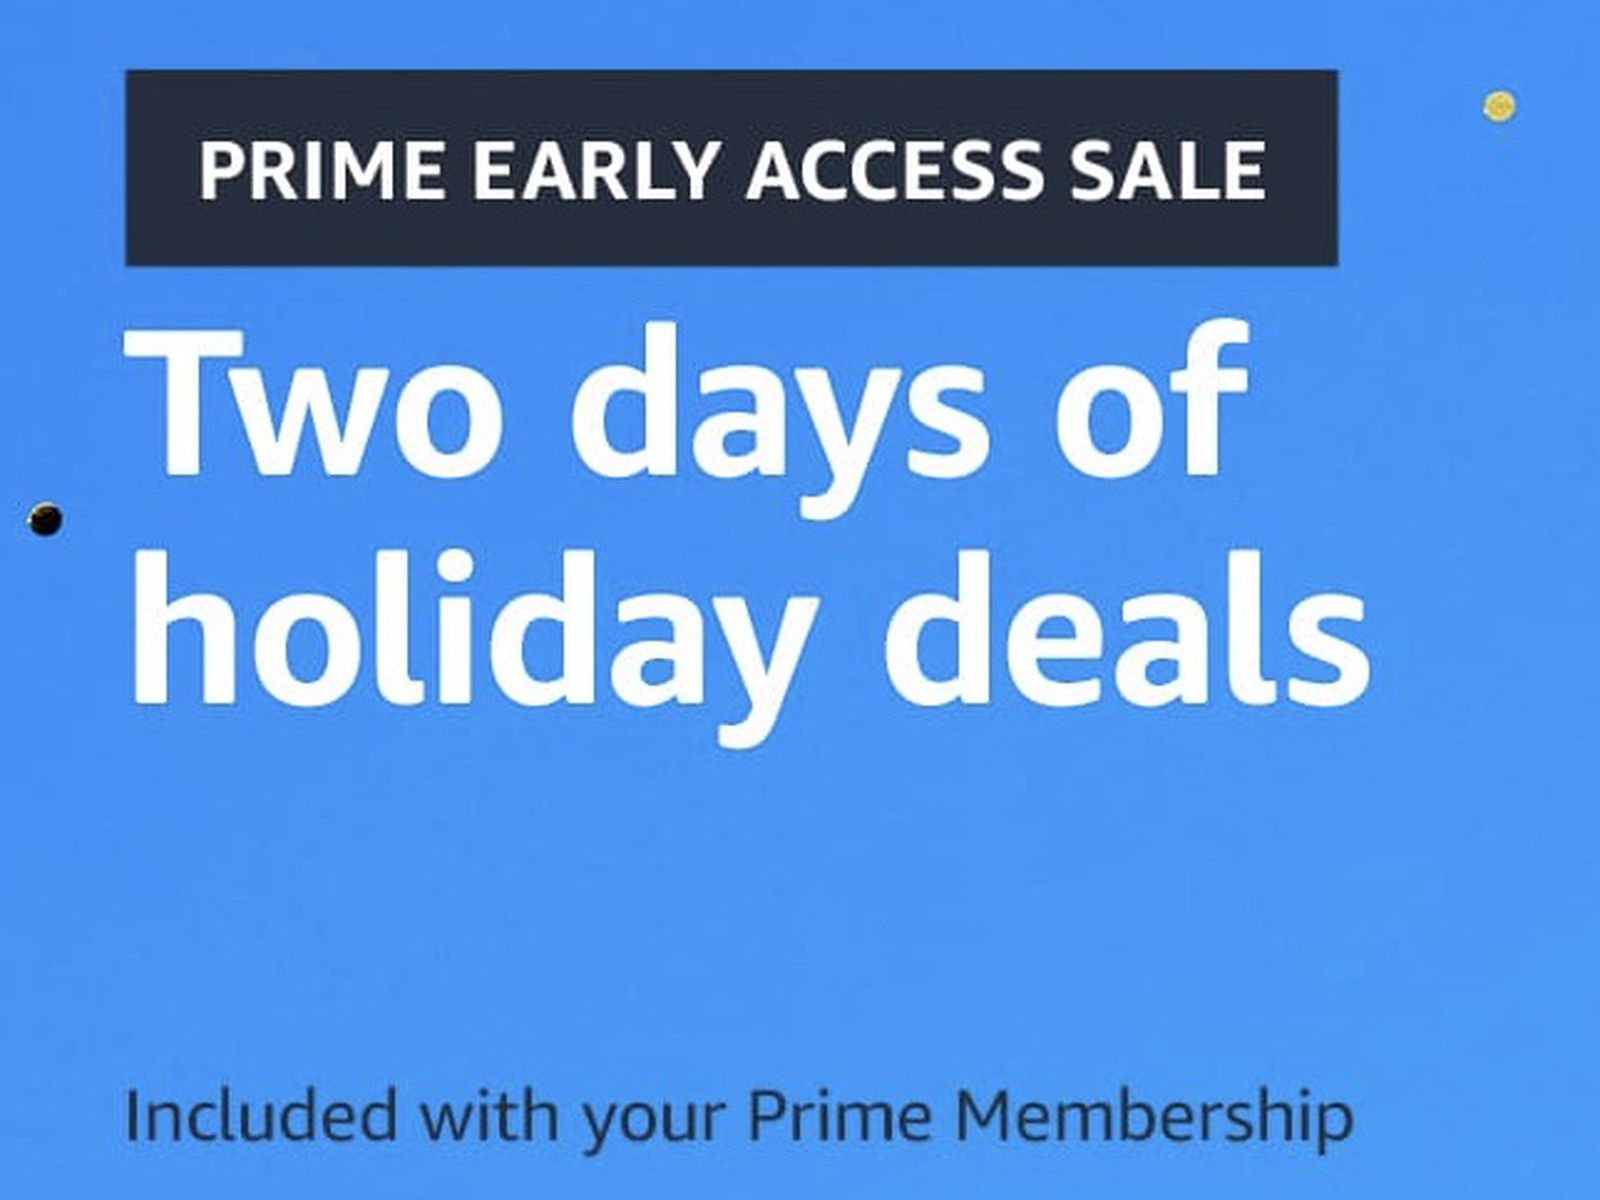 What is  Prime Early Access Sale and when is it?